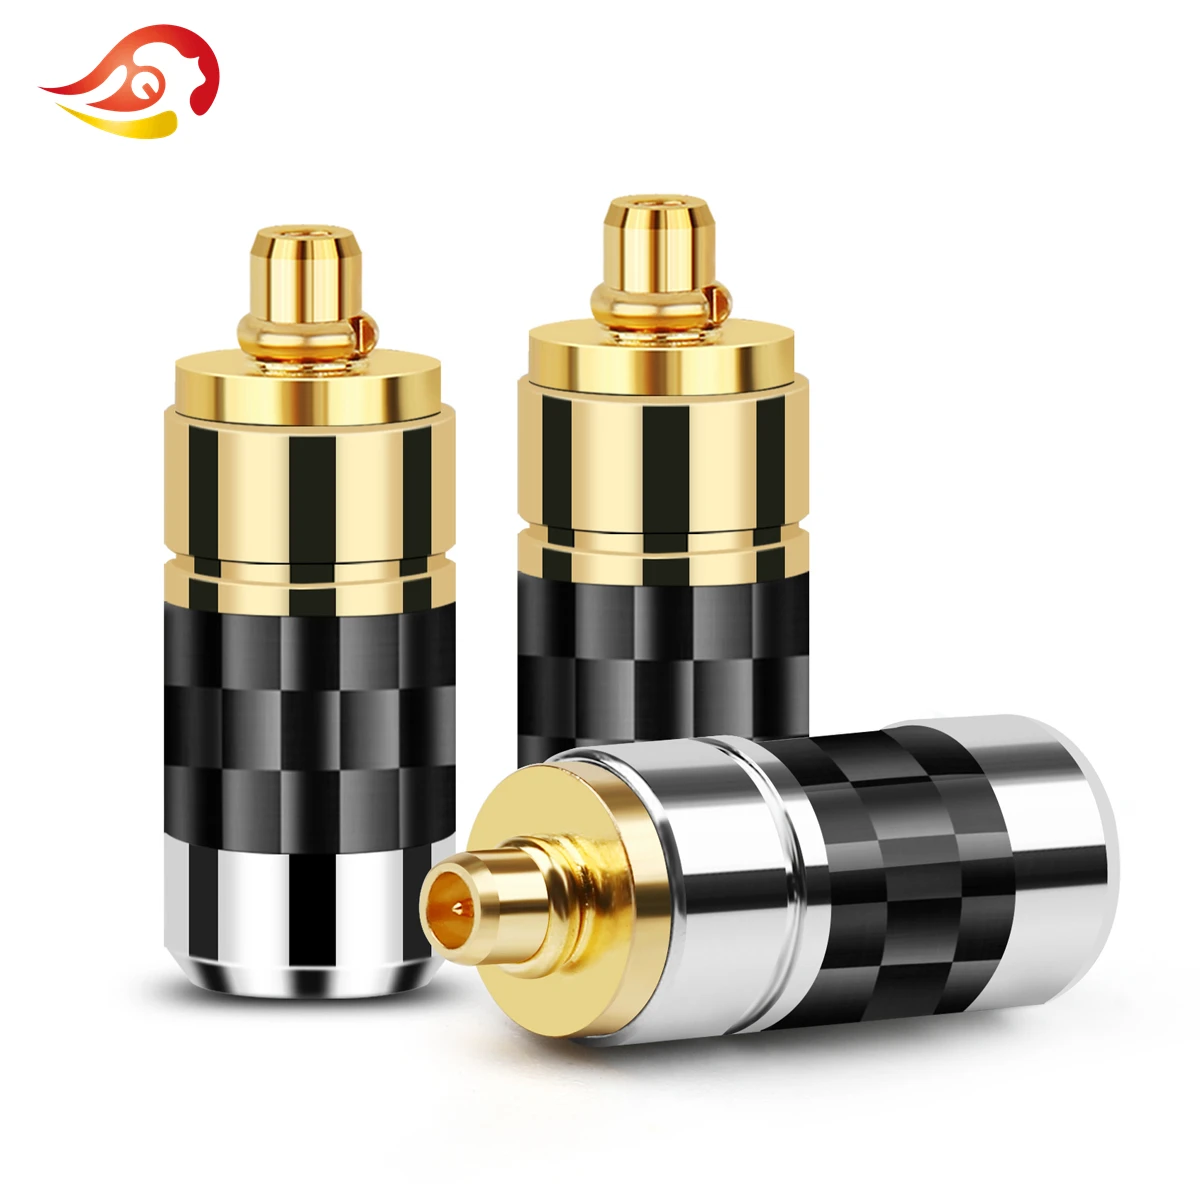 QYFANG Aluminum Alloy Earphone Plug Carbon Fiber MMCX Pin Audio Jack Wire Connector Metal Adapter For W80 SE535 SE846 Headphone